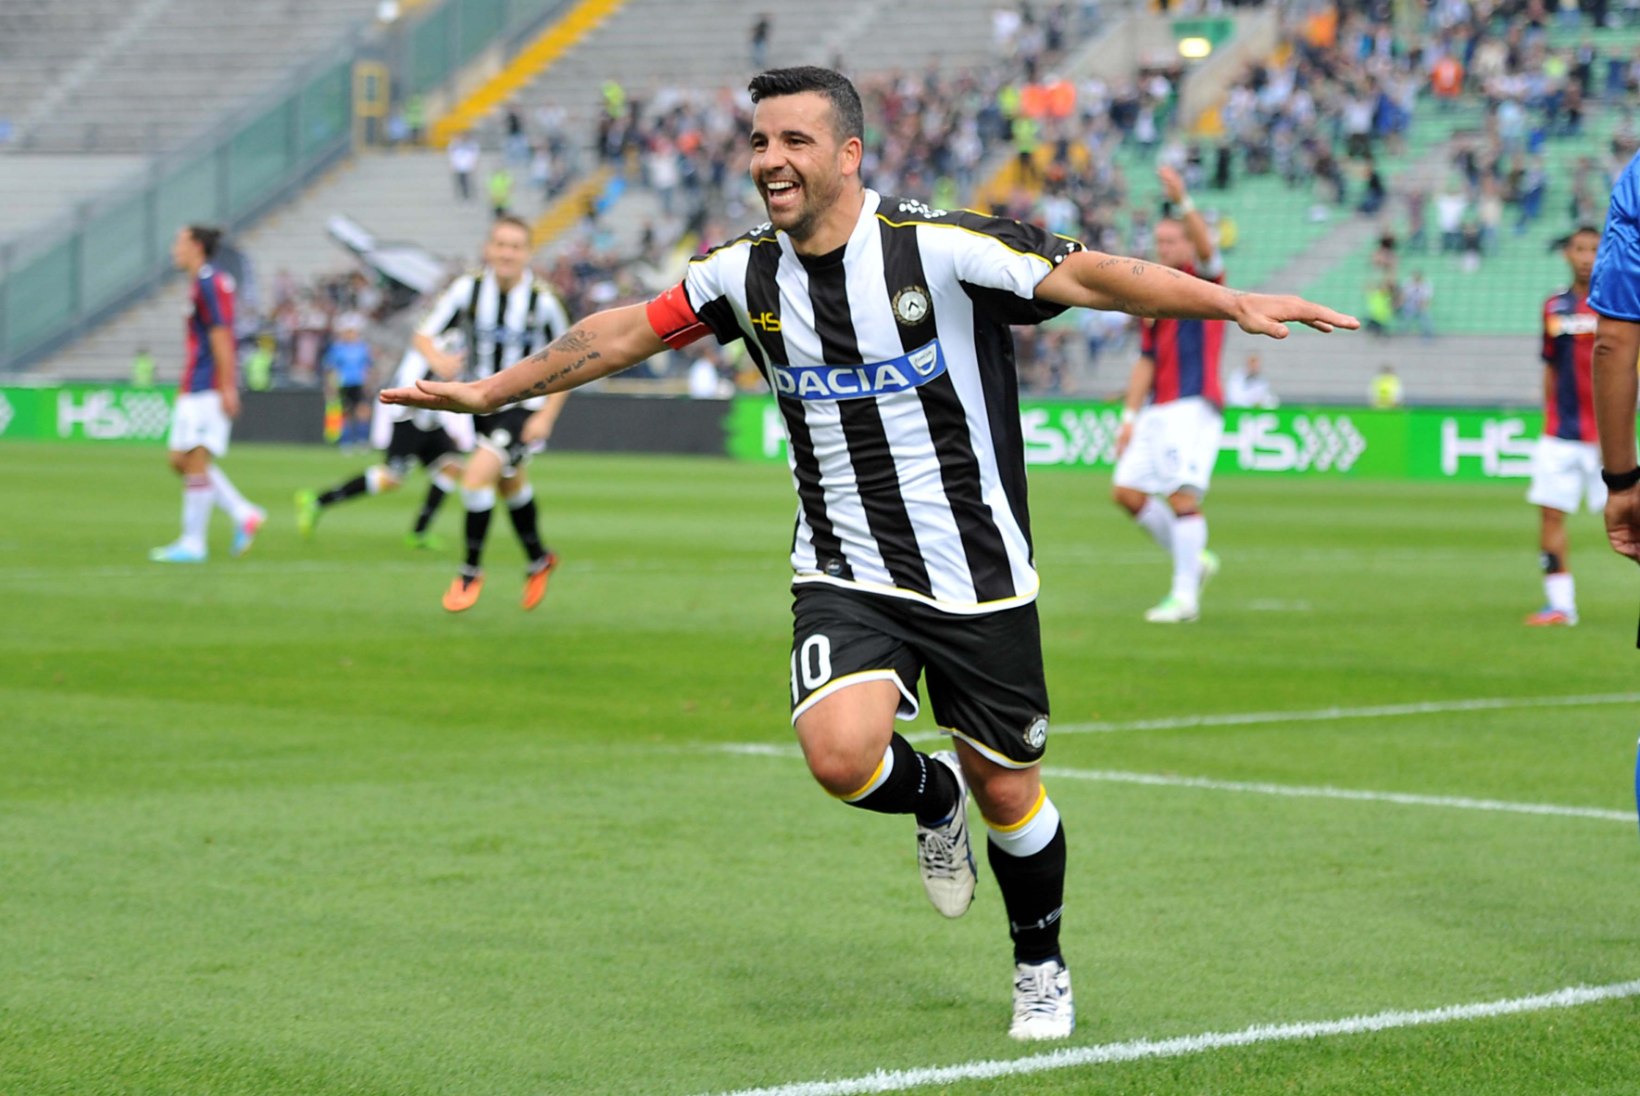 Serie A roundup: Derby d'Italia and Mario's penalty record